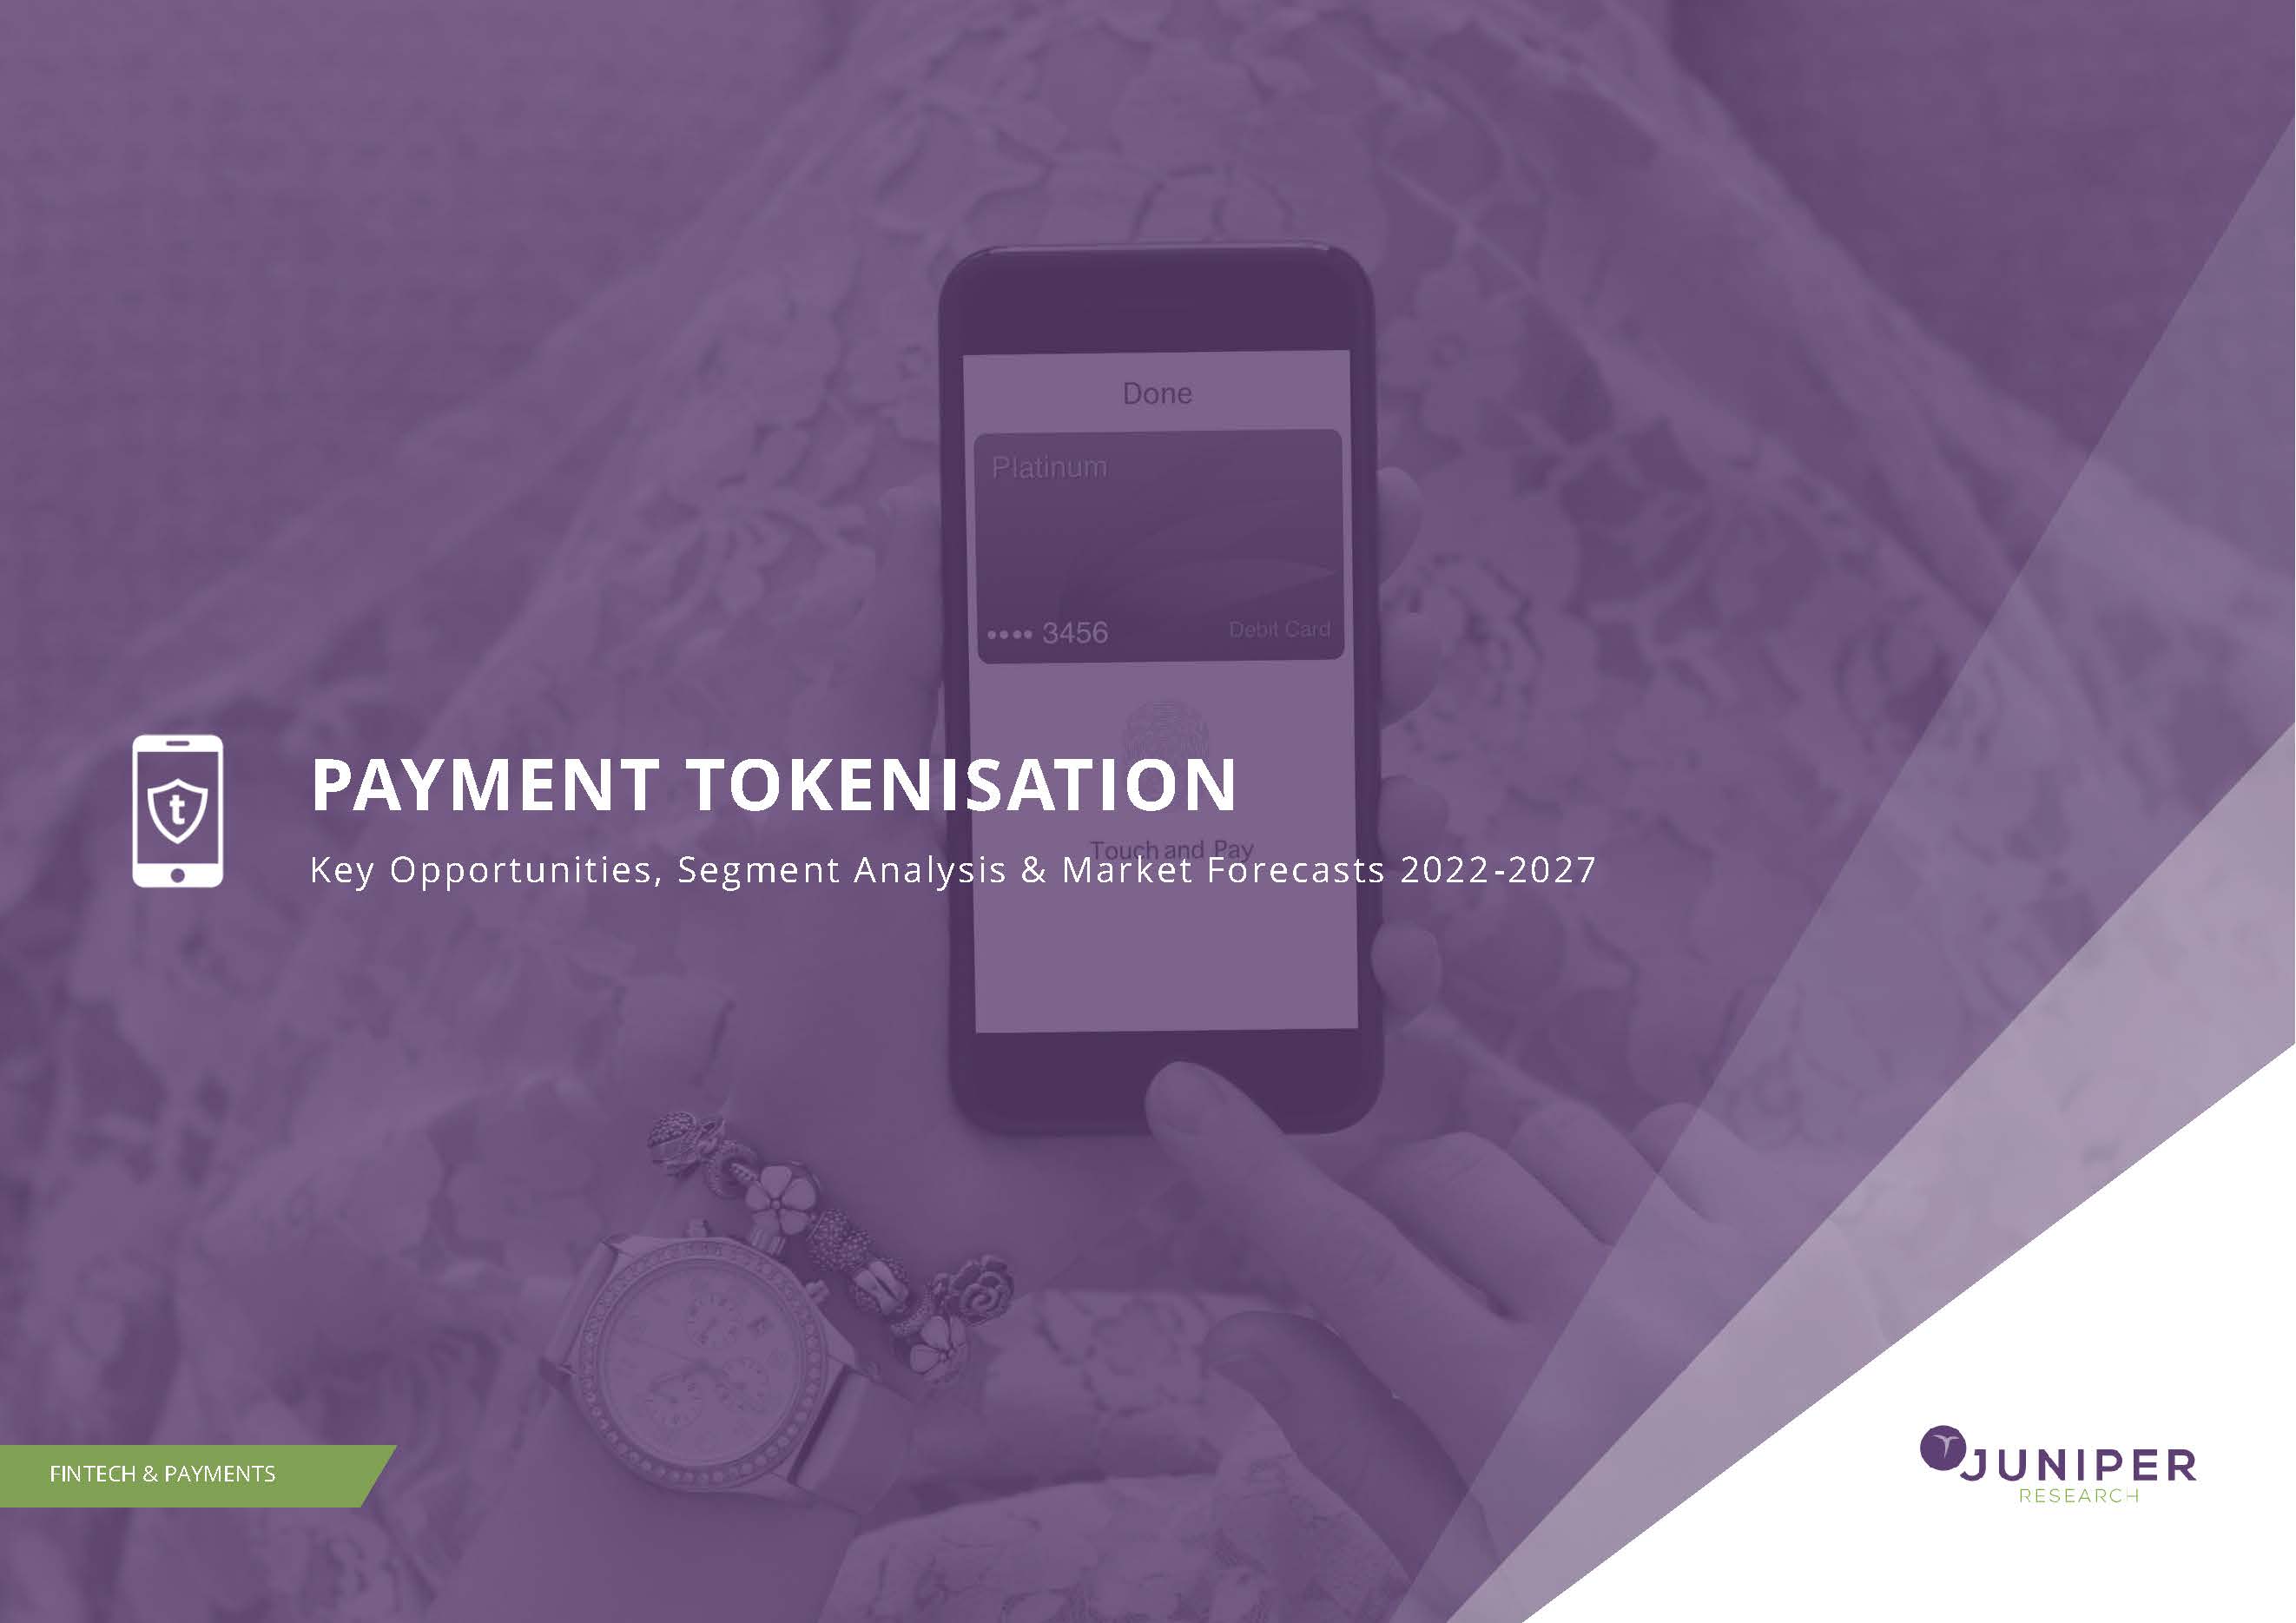 Tokenised Payment Transactions to Exceed 1 Trillion Globally by 2026; Driven by Click-to-Pay